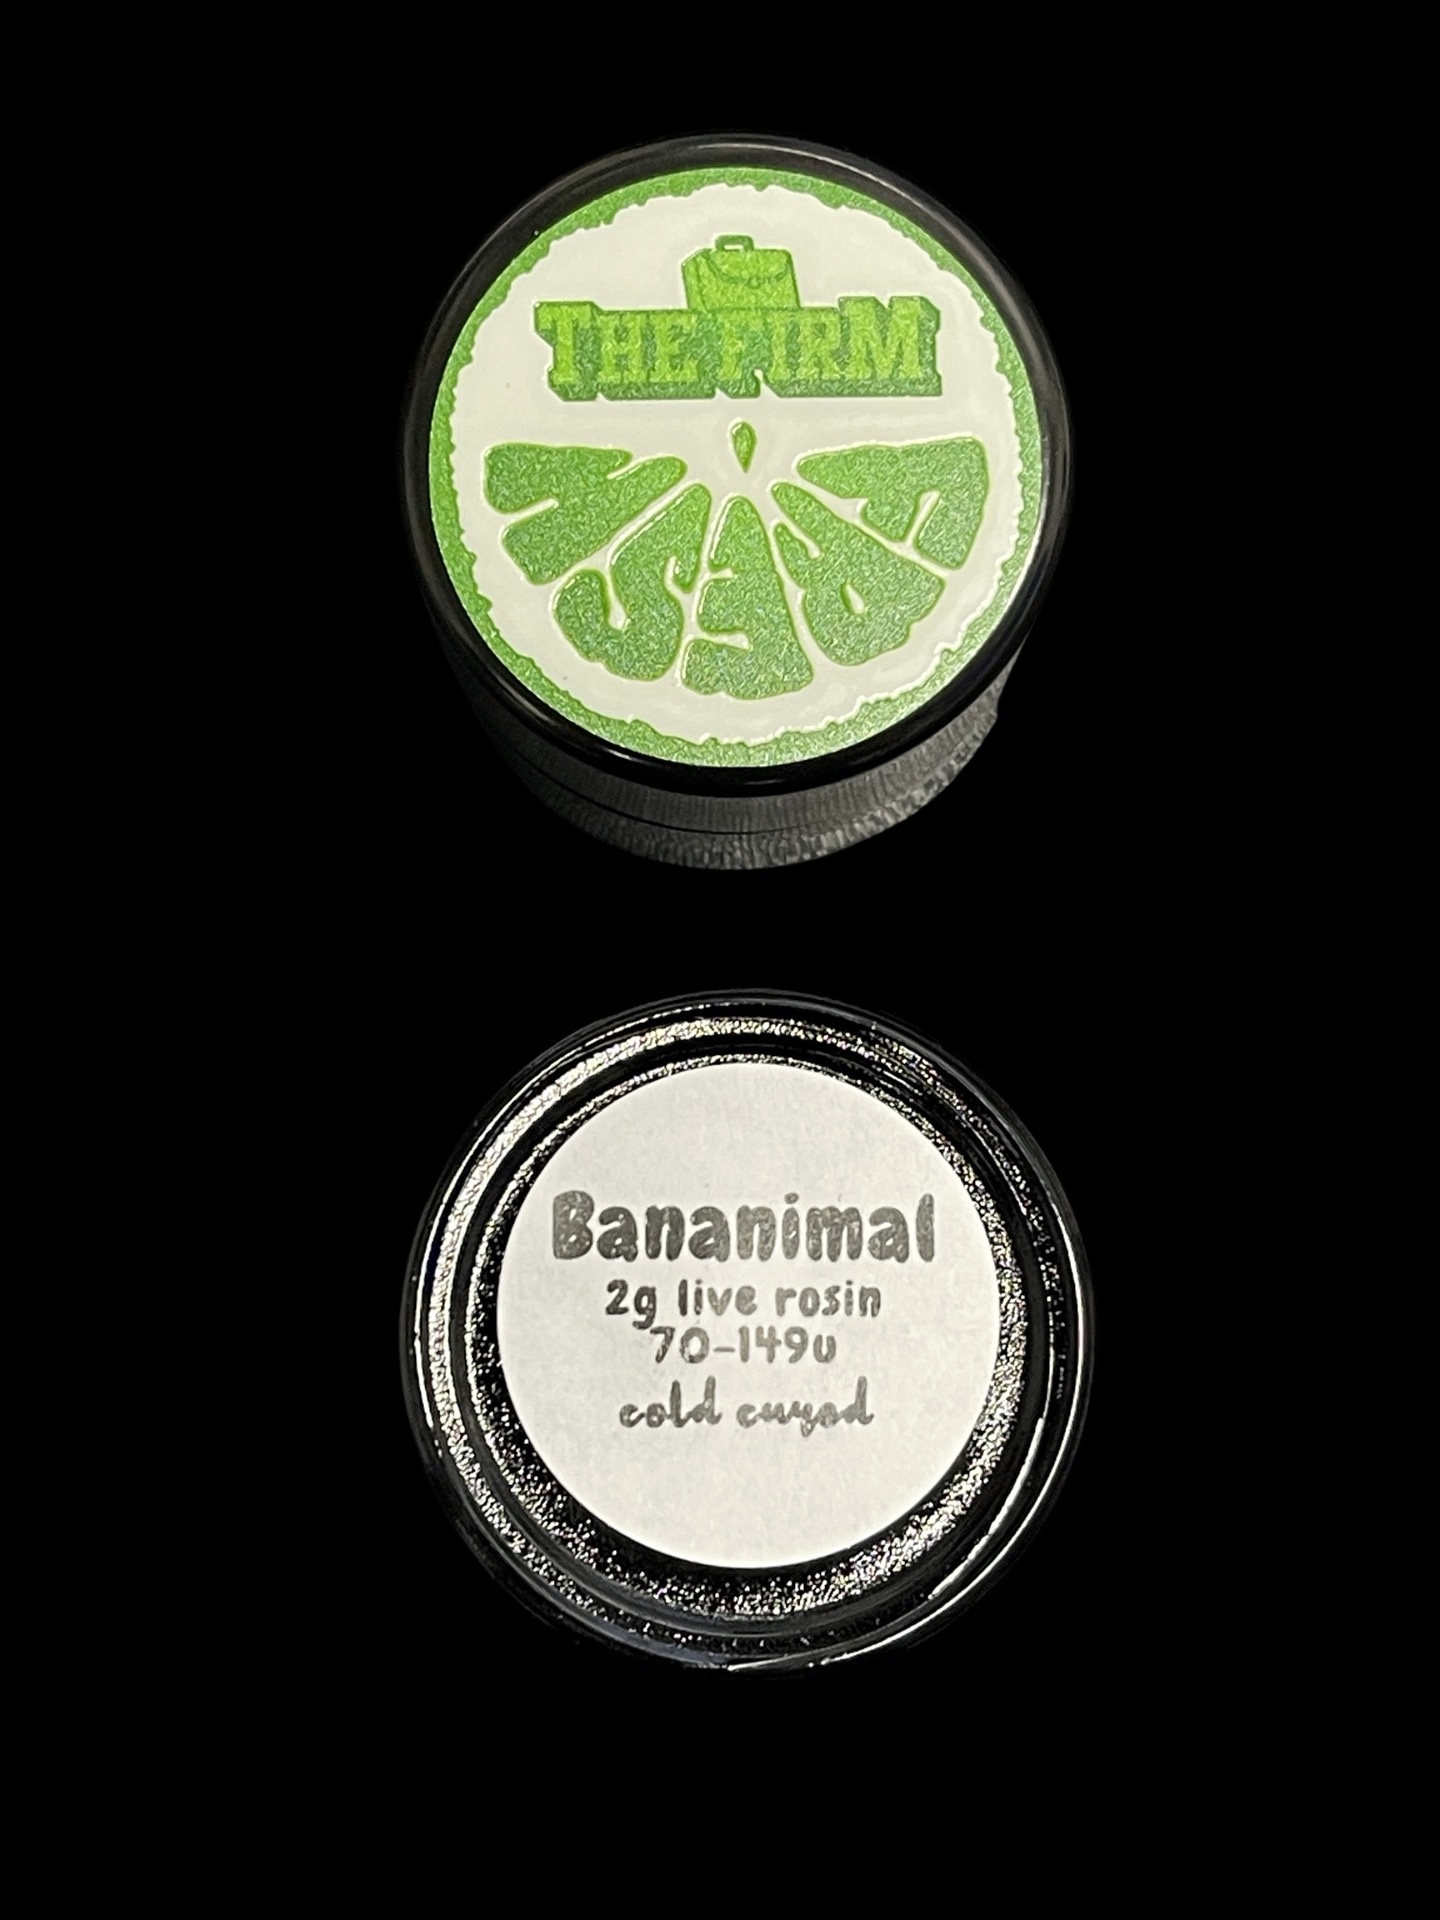 Fresh Squeeze X The Firm - Bananimal 70-149u 2G